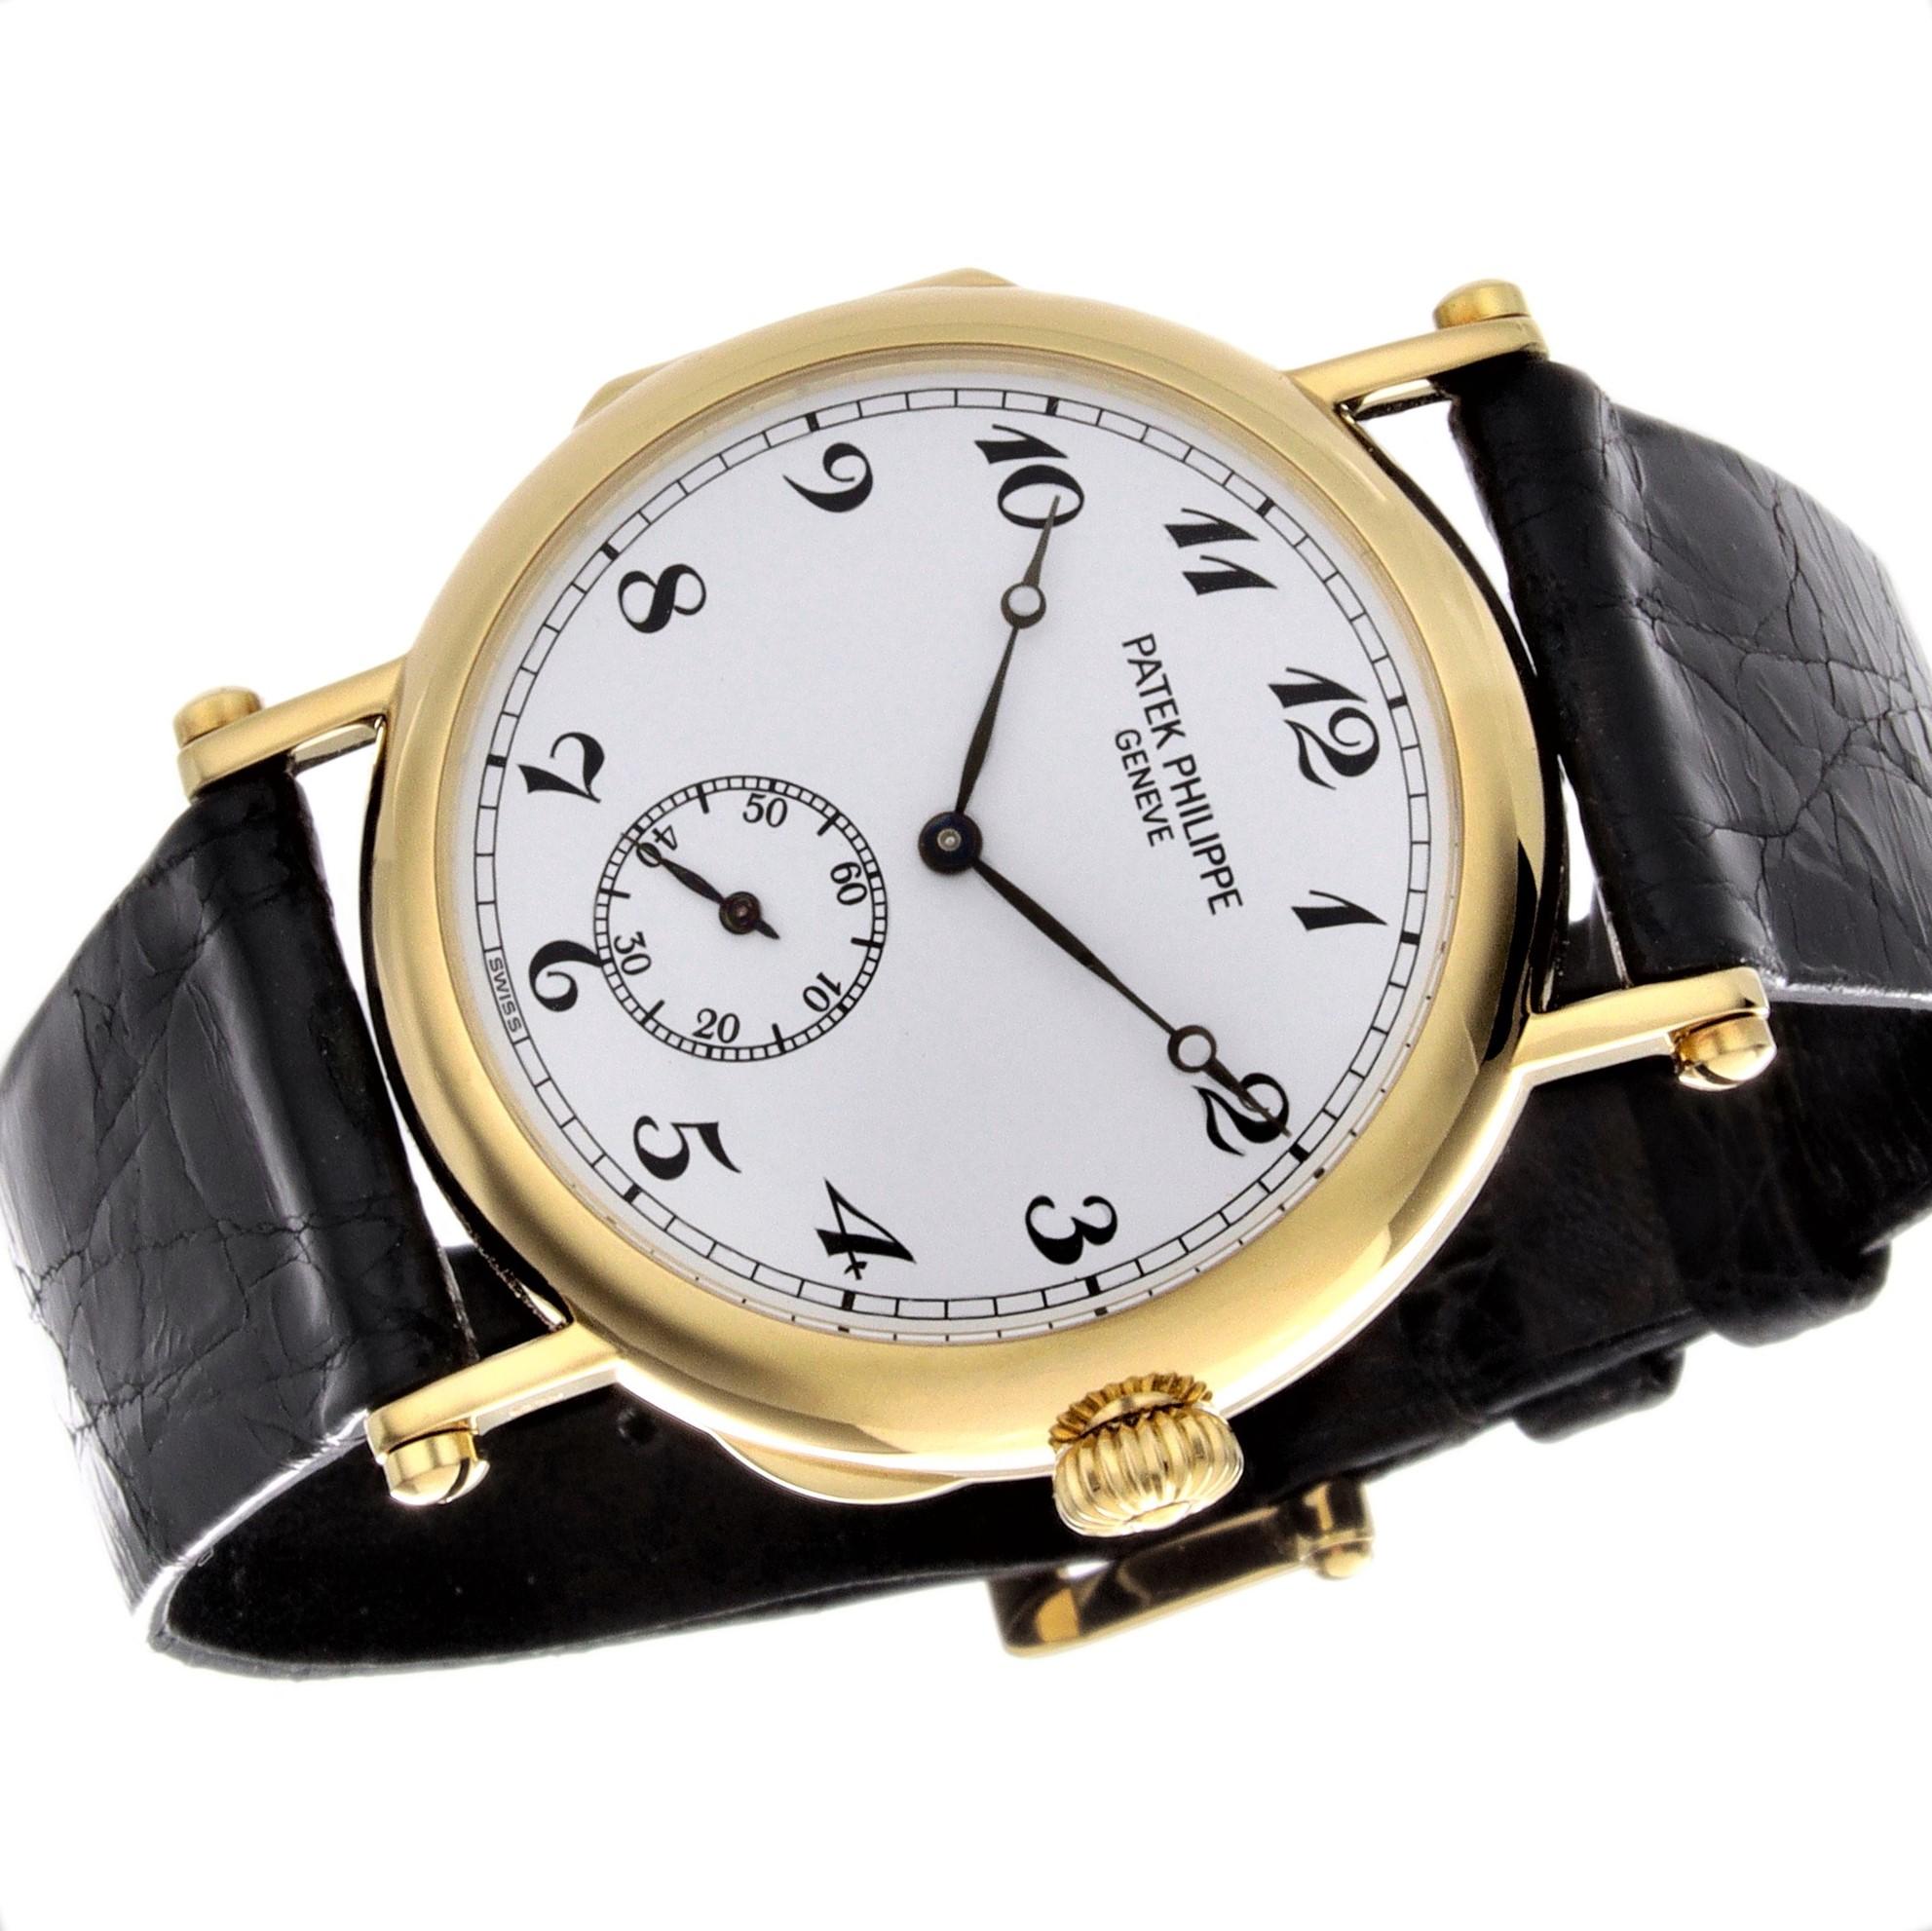 Introduction:
This Patek Philippe 3960J Calatrava 150th Anniversary Officers Case watch features a small seconds dial and original Patek alligator strap with original 18K Yellow Gold Patek buckle.  This watch was purchased from a collector.  It has